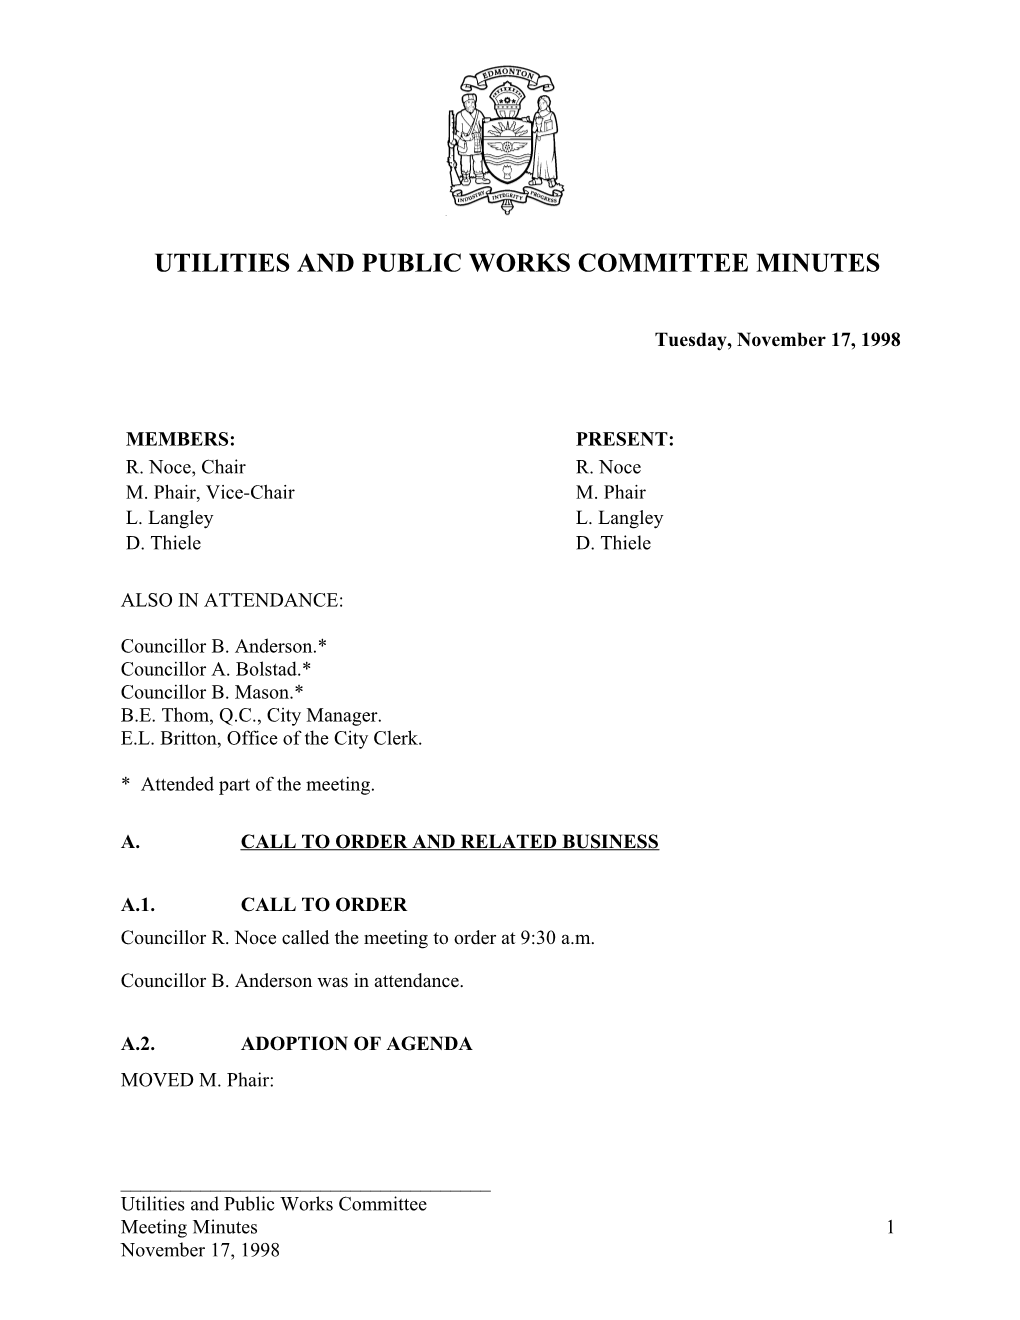 Minutes for Utilities and Public Works Committee November 17, 1998 Meeting